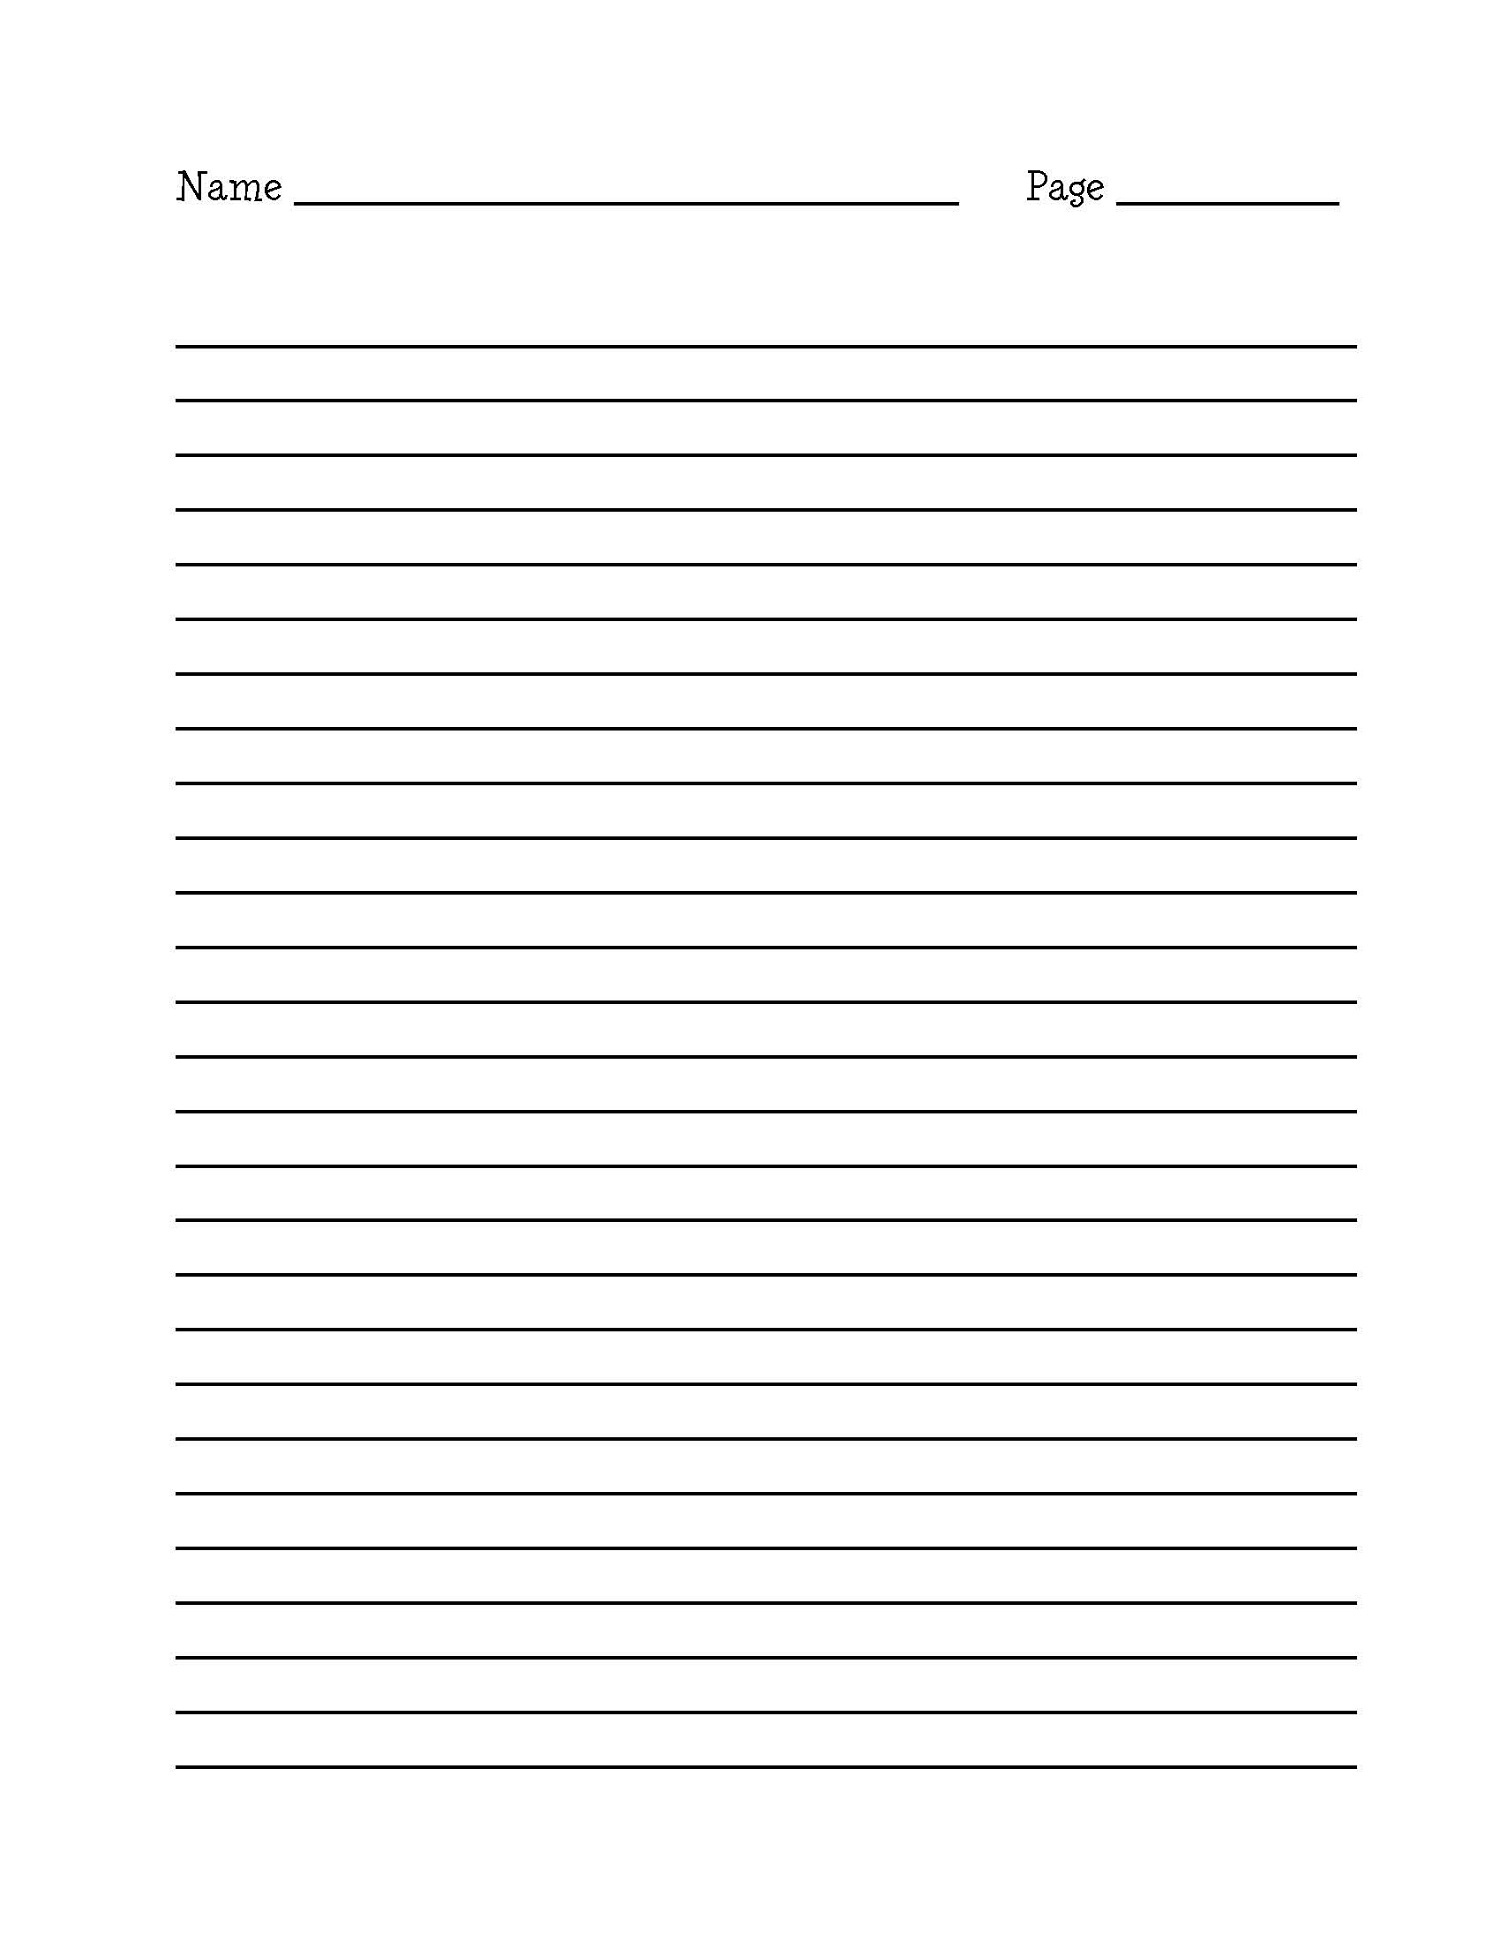 printable-writing-paper-with-border-floss-papers-elementary-lined